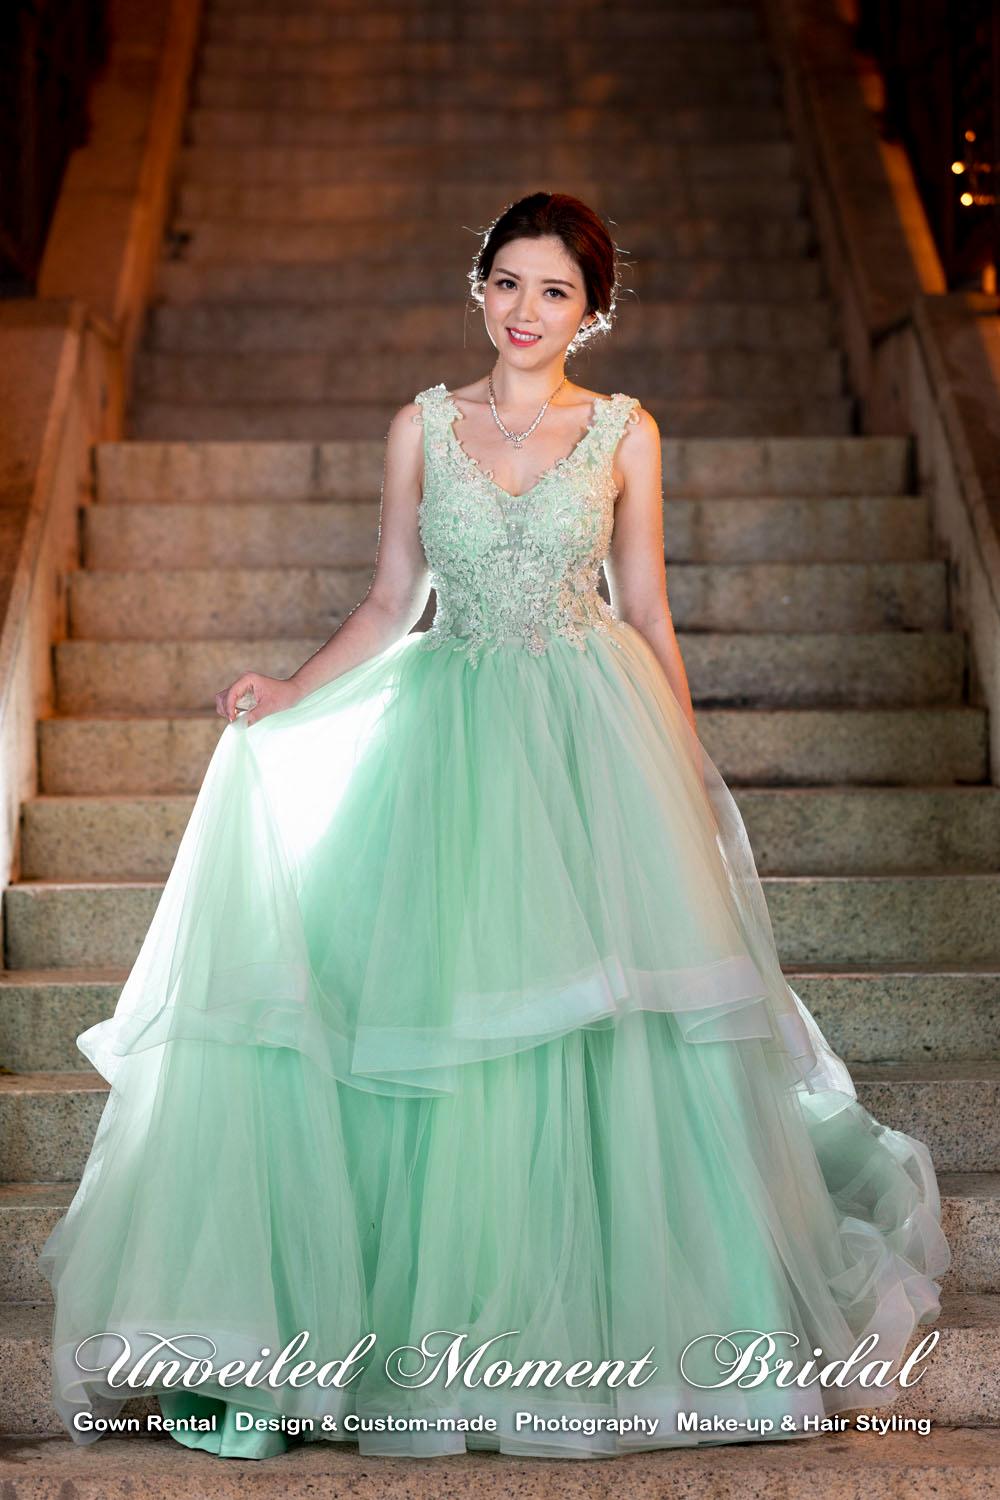 Bride wearing v-shape neckline, low-back, bodice with embellished lace, ruffled overlay, light green evening gown with brush train 新娘穿上V領, 露背, 上身蕾絲釘珠, 荷葉邊裙擺, 小拖尾薄荷绿色晚裝